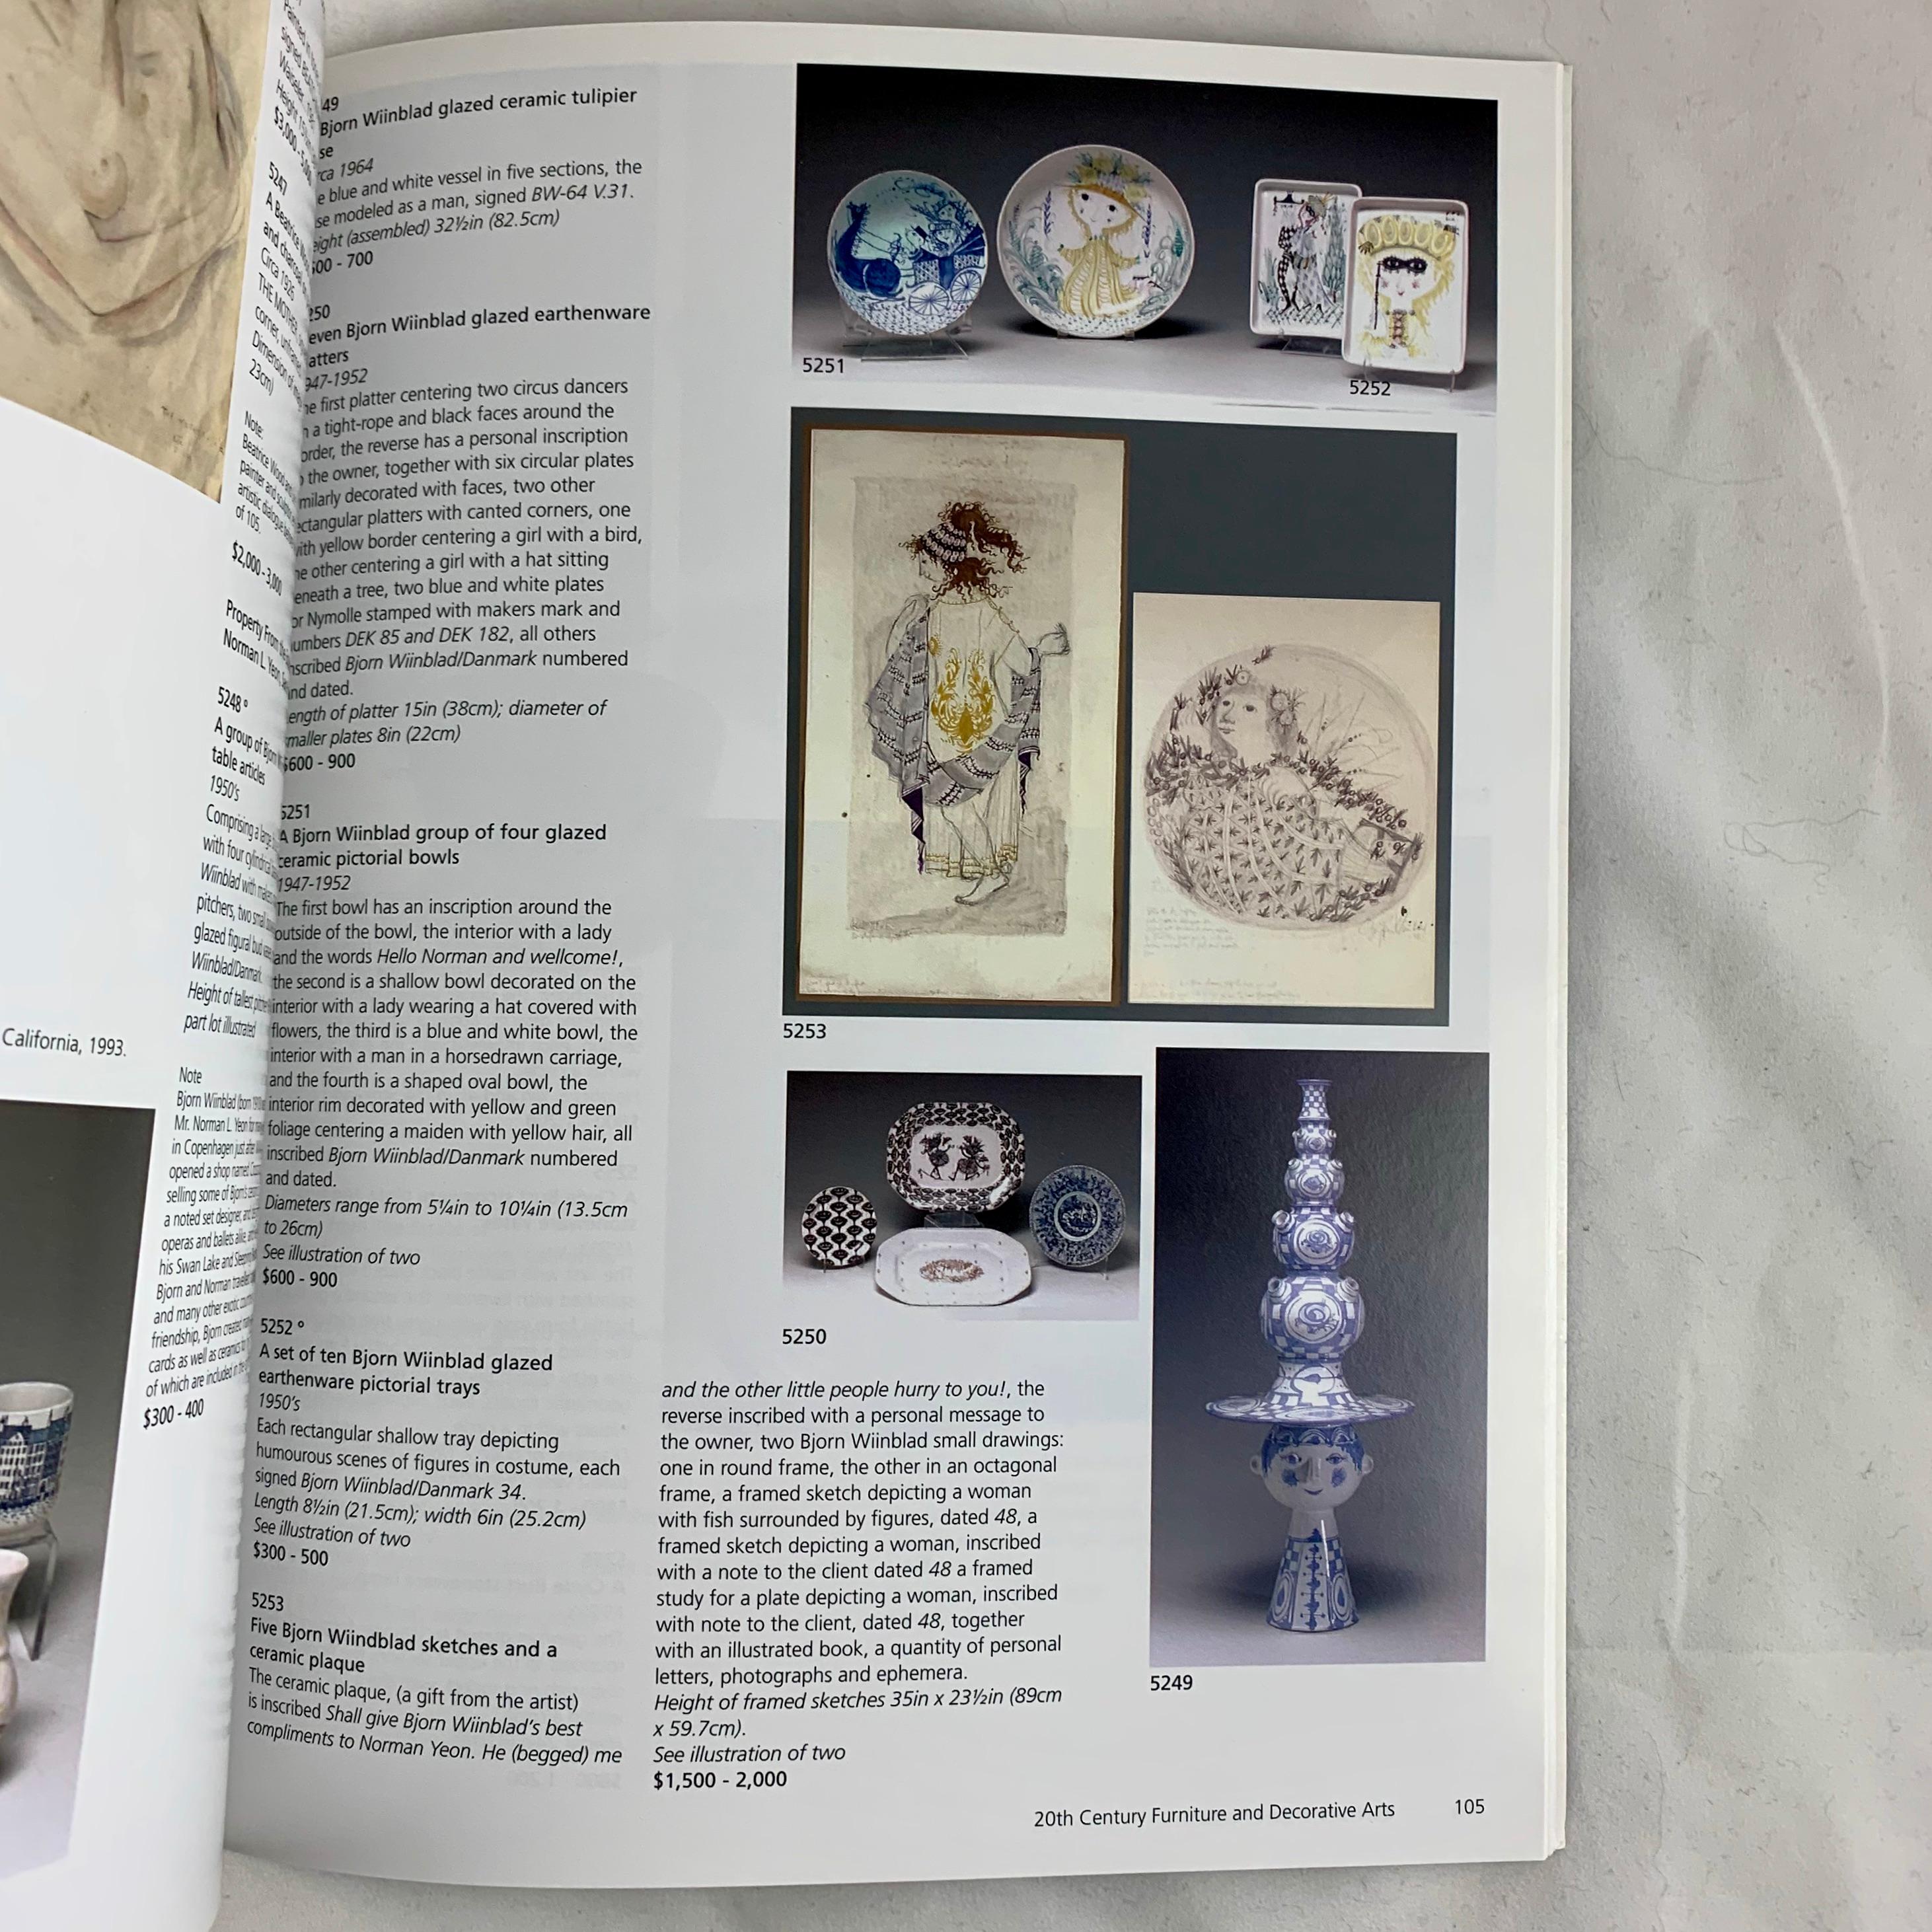 Machine-Made Bonhams & Butterfield Furniture and Decorative Arts Auction Catalogue, 2004 For Sale